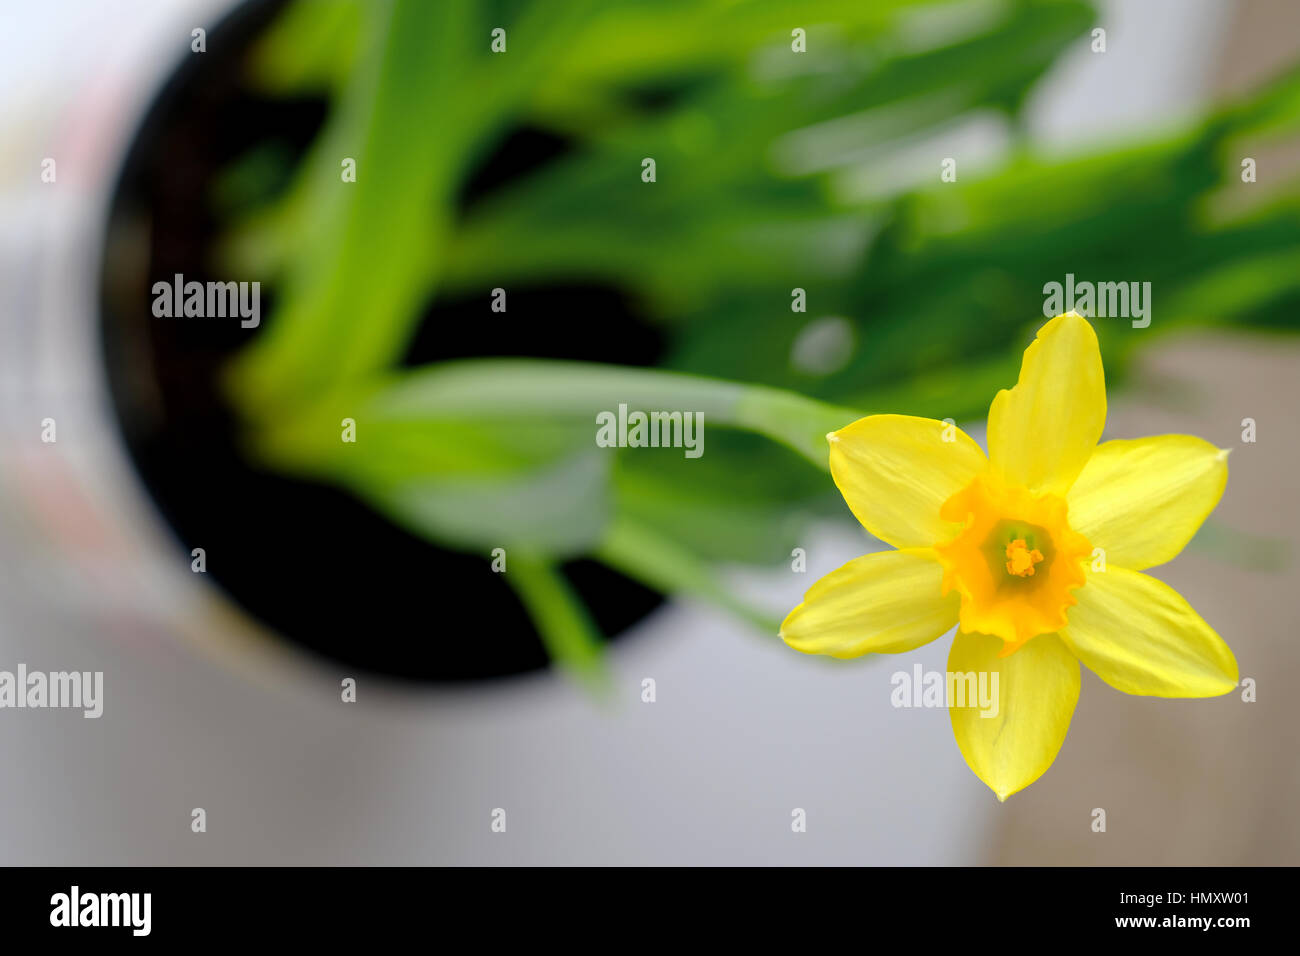 A single open yellow daffodil from a potted plant facing into the camera lens Stock Photo